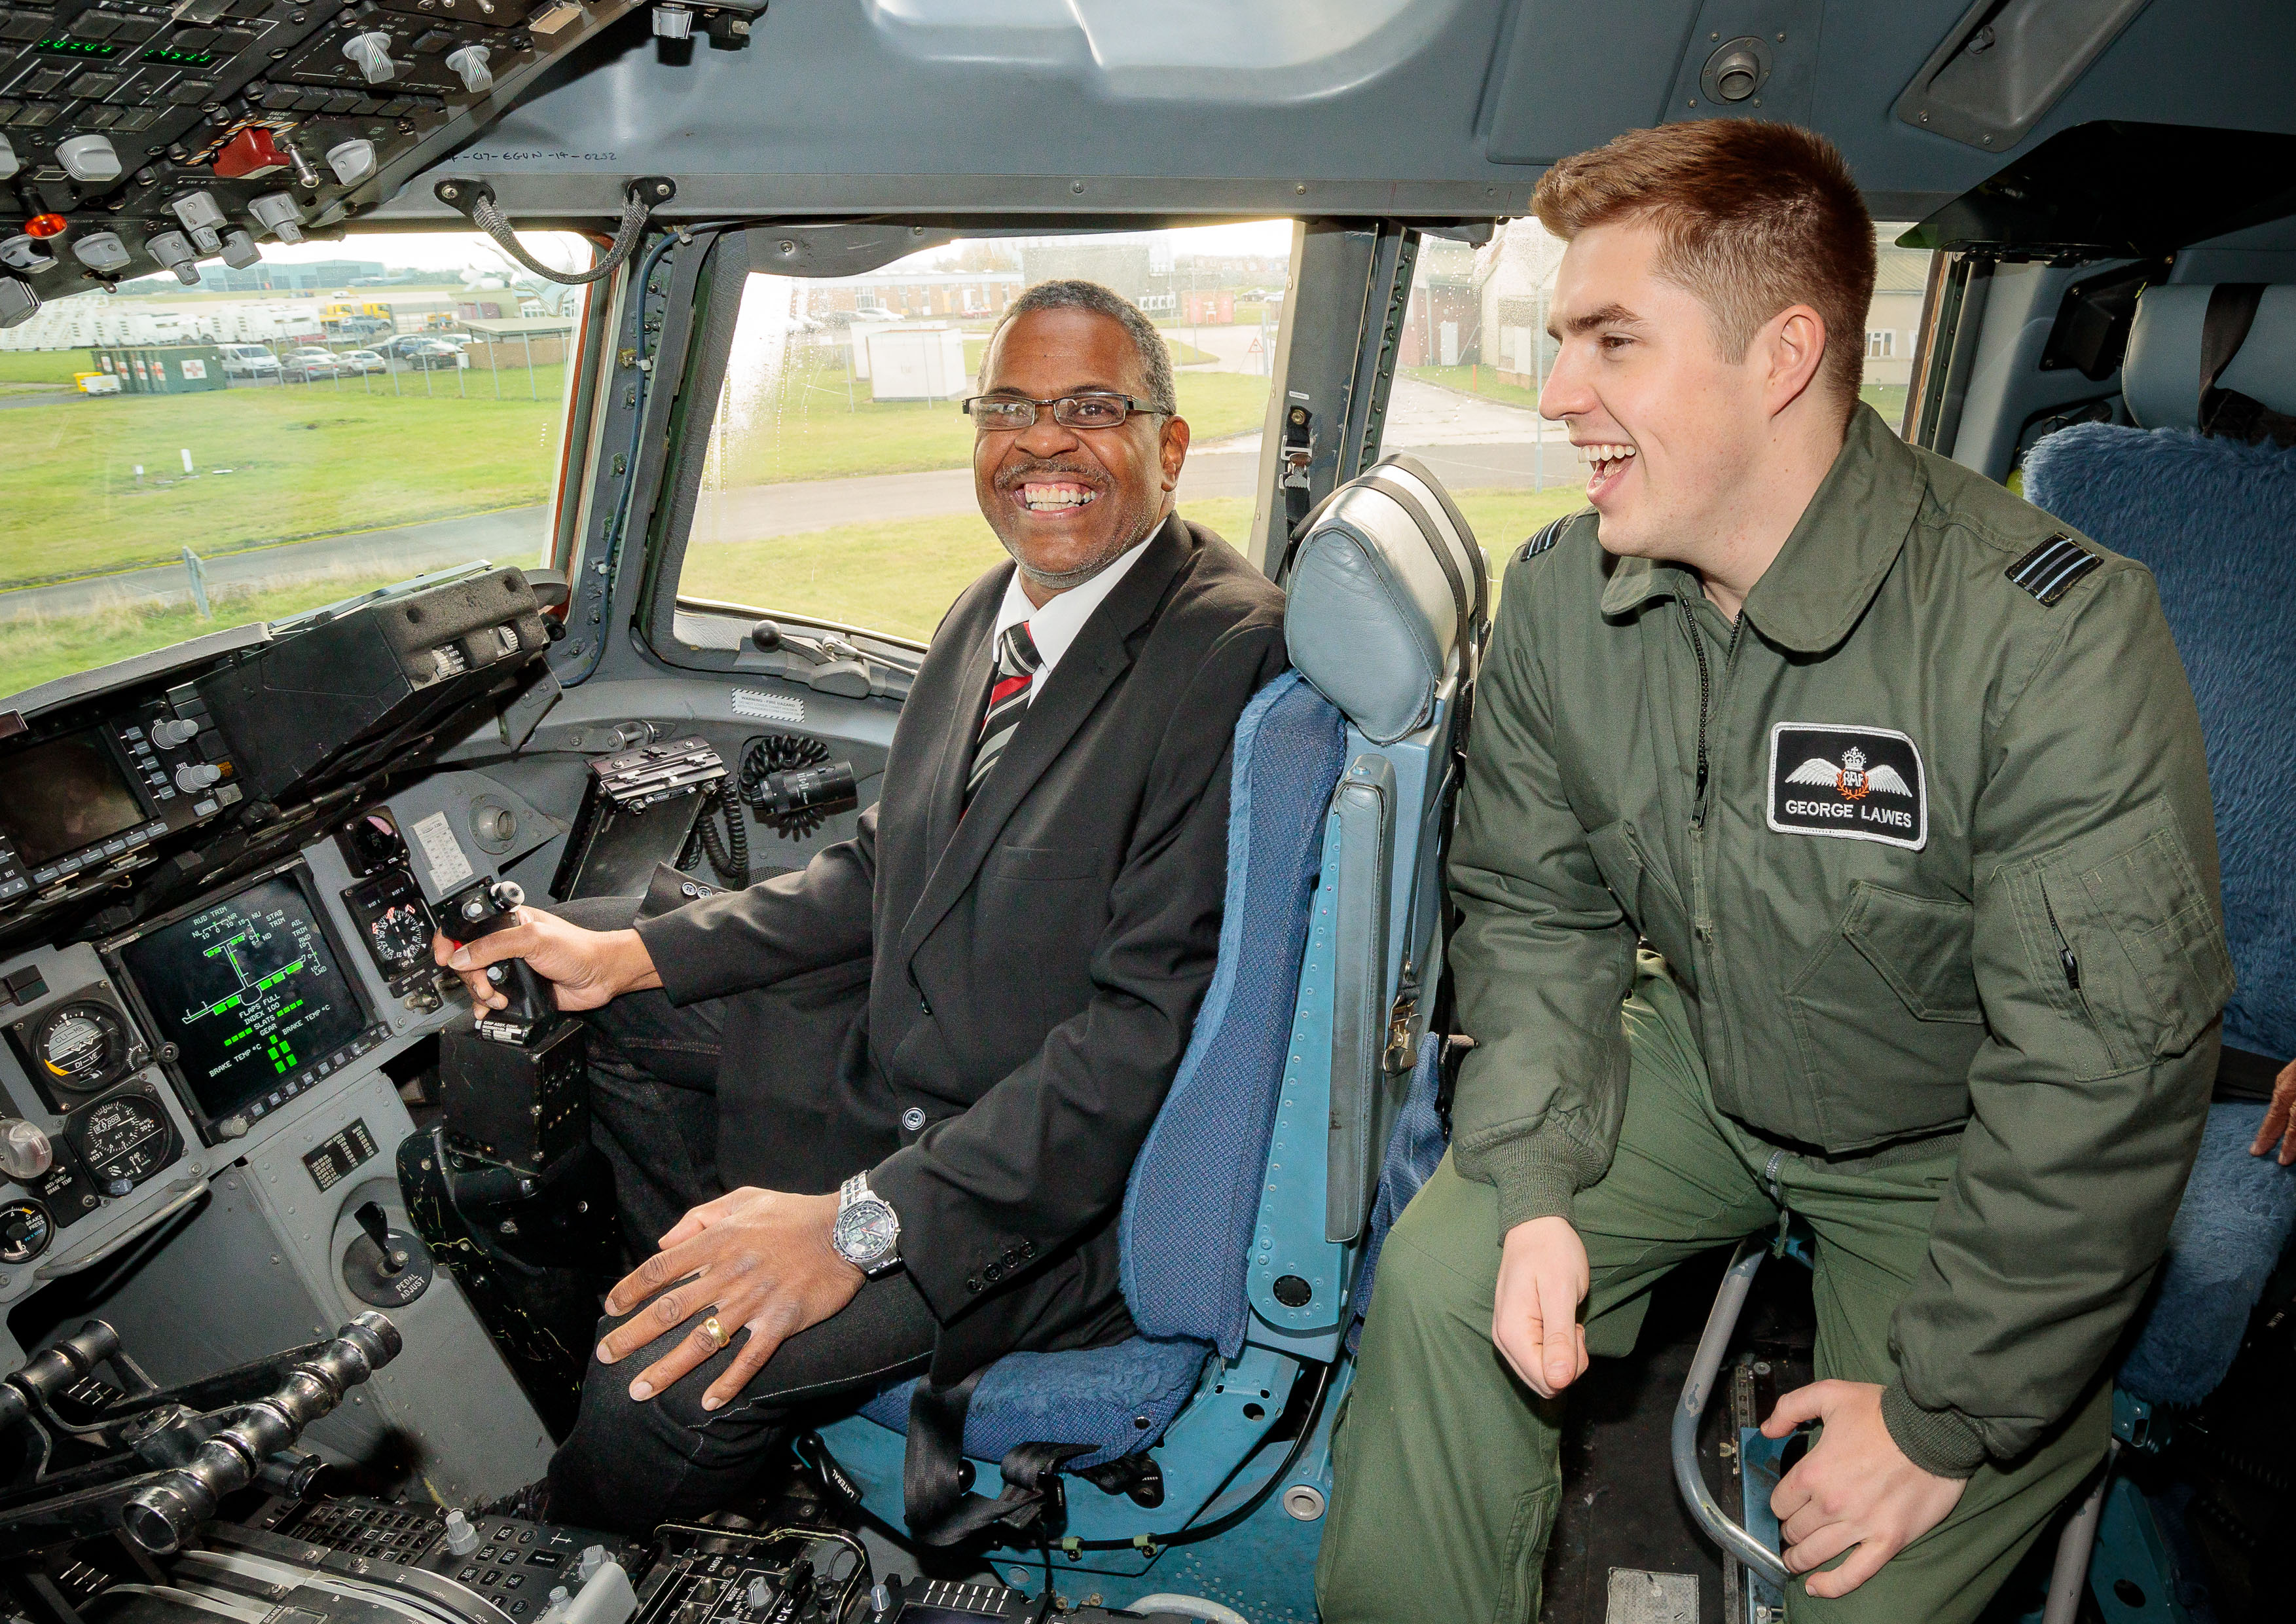 On 23rd November, Community and Religious Leaders from the Birmingham area visited RAF Brize Norton for a familiarisation event, highlighting the wide range of branches available to the young adults in their communities.